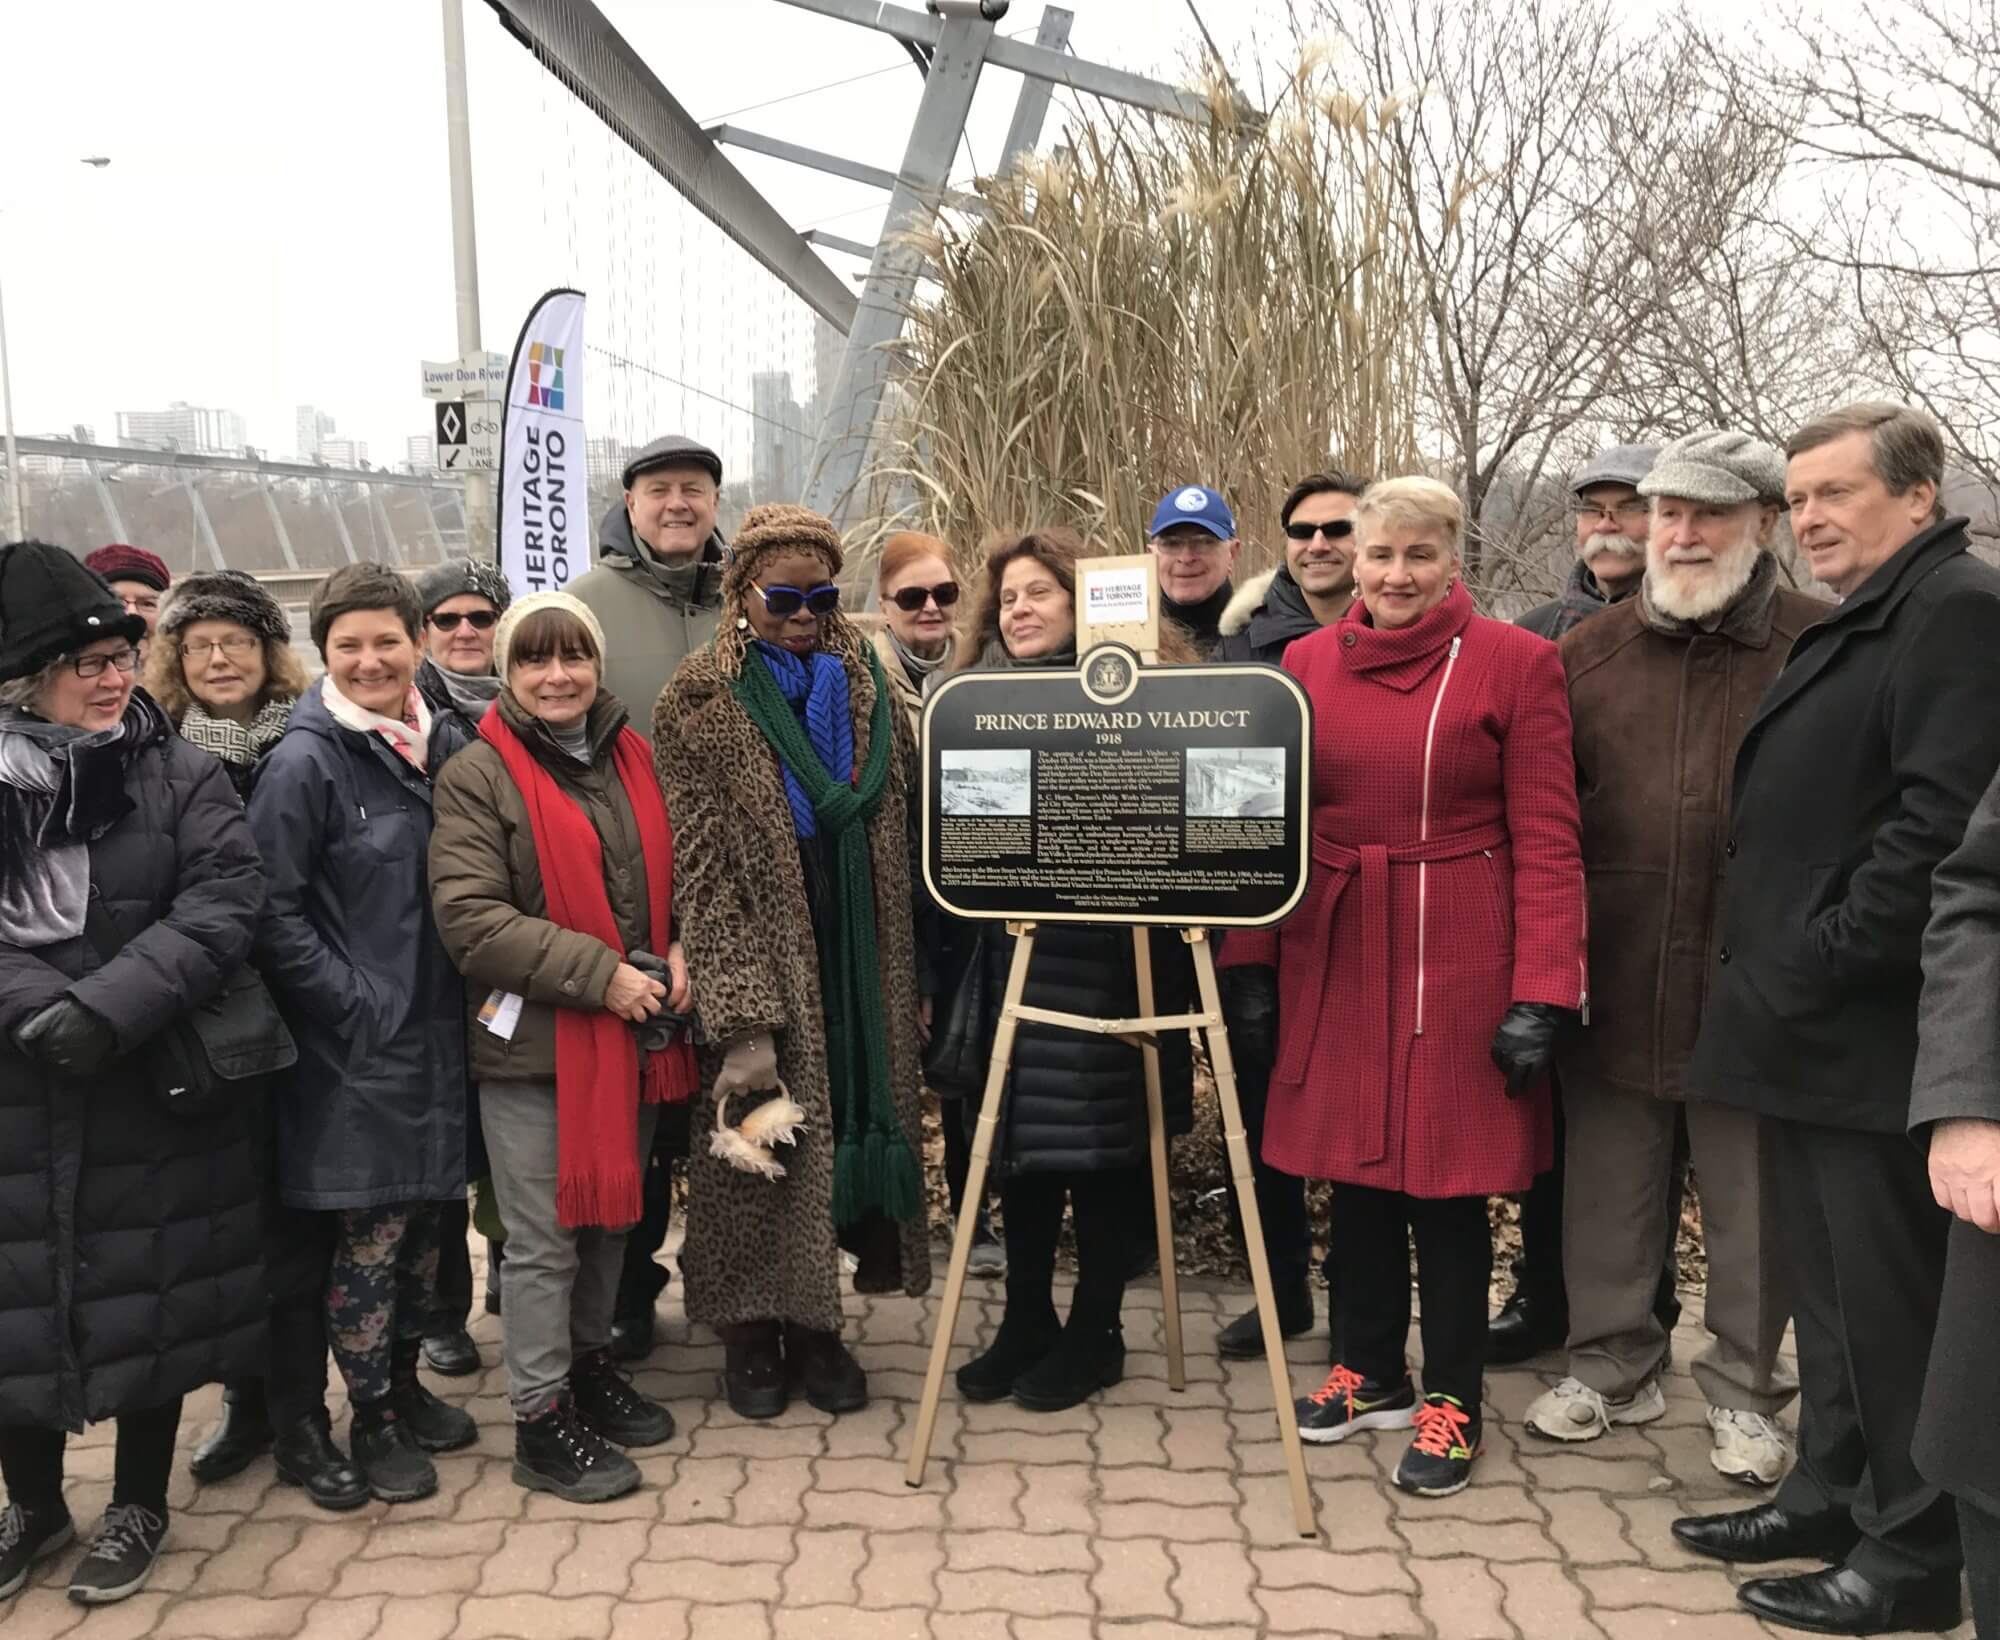 Colour photograph. A crowd of people stand behind the plaque, smiling for the photo. The Prince Edward Viaduct is in the background.